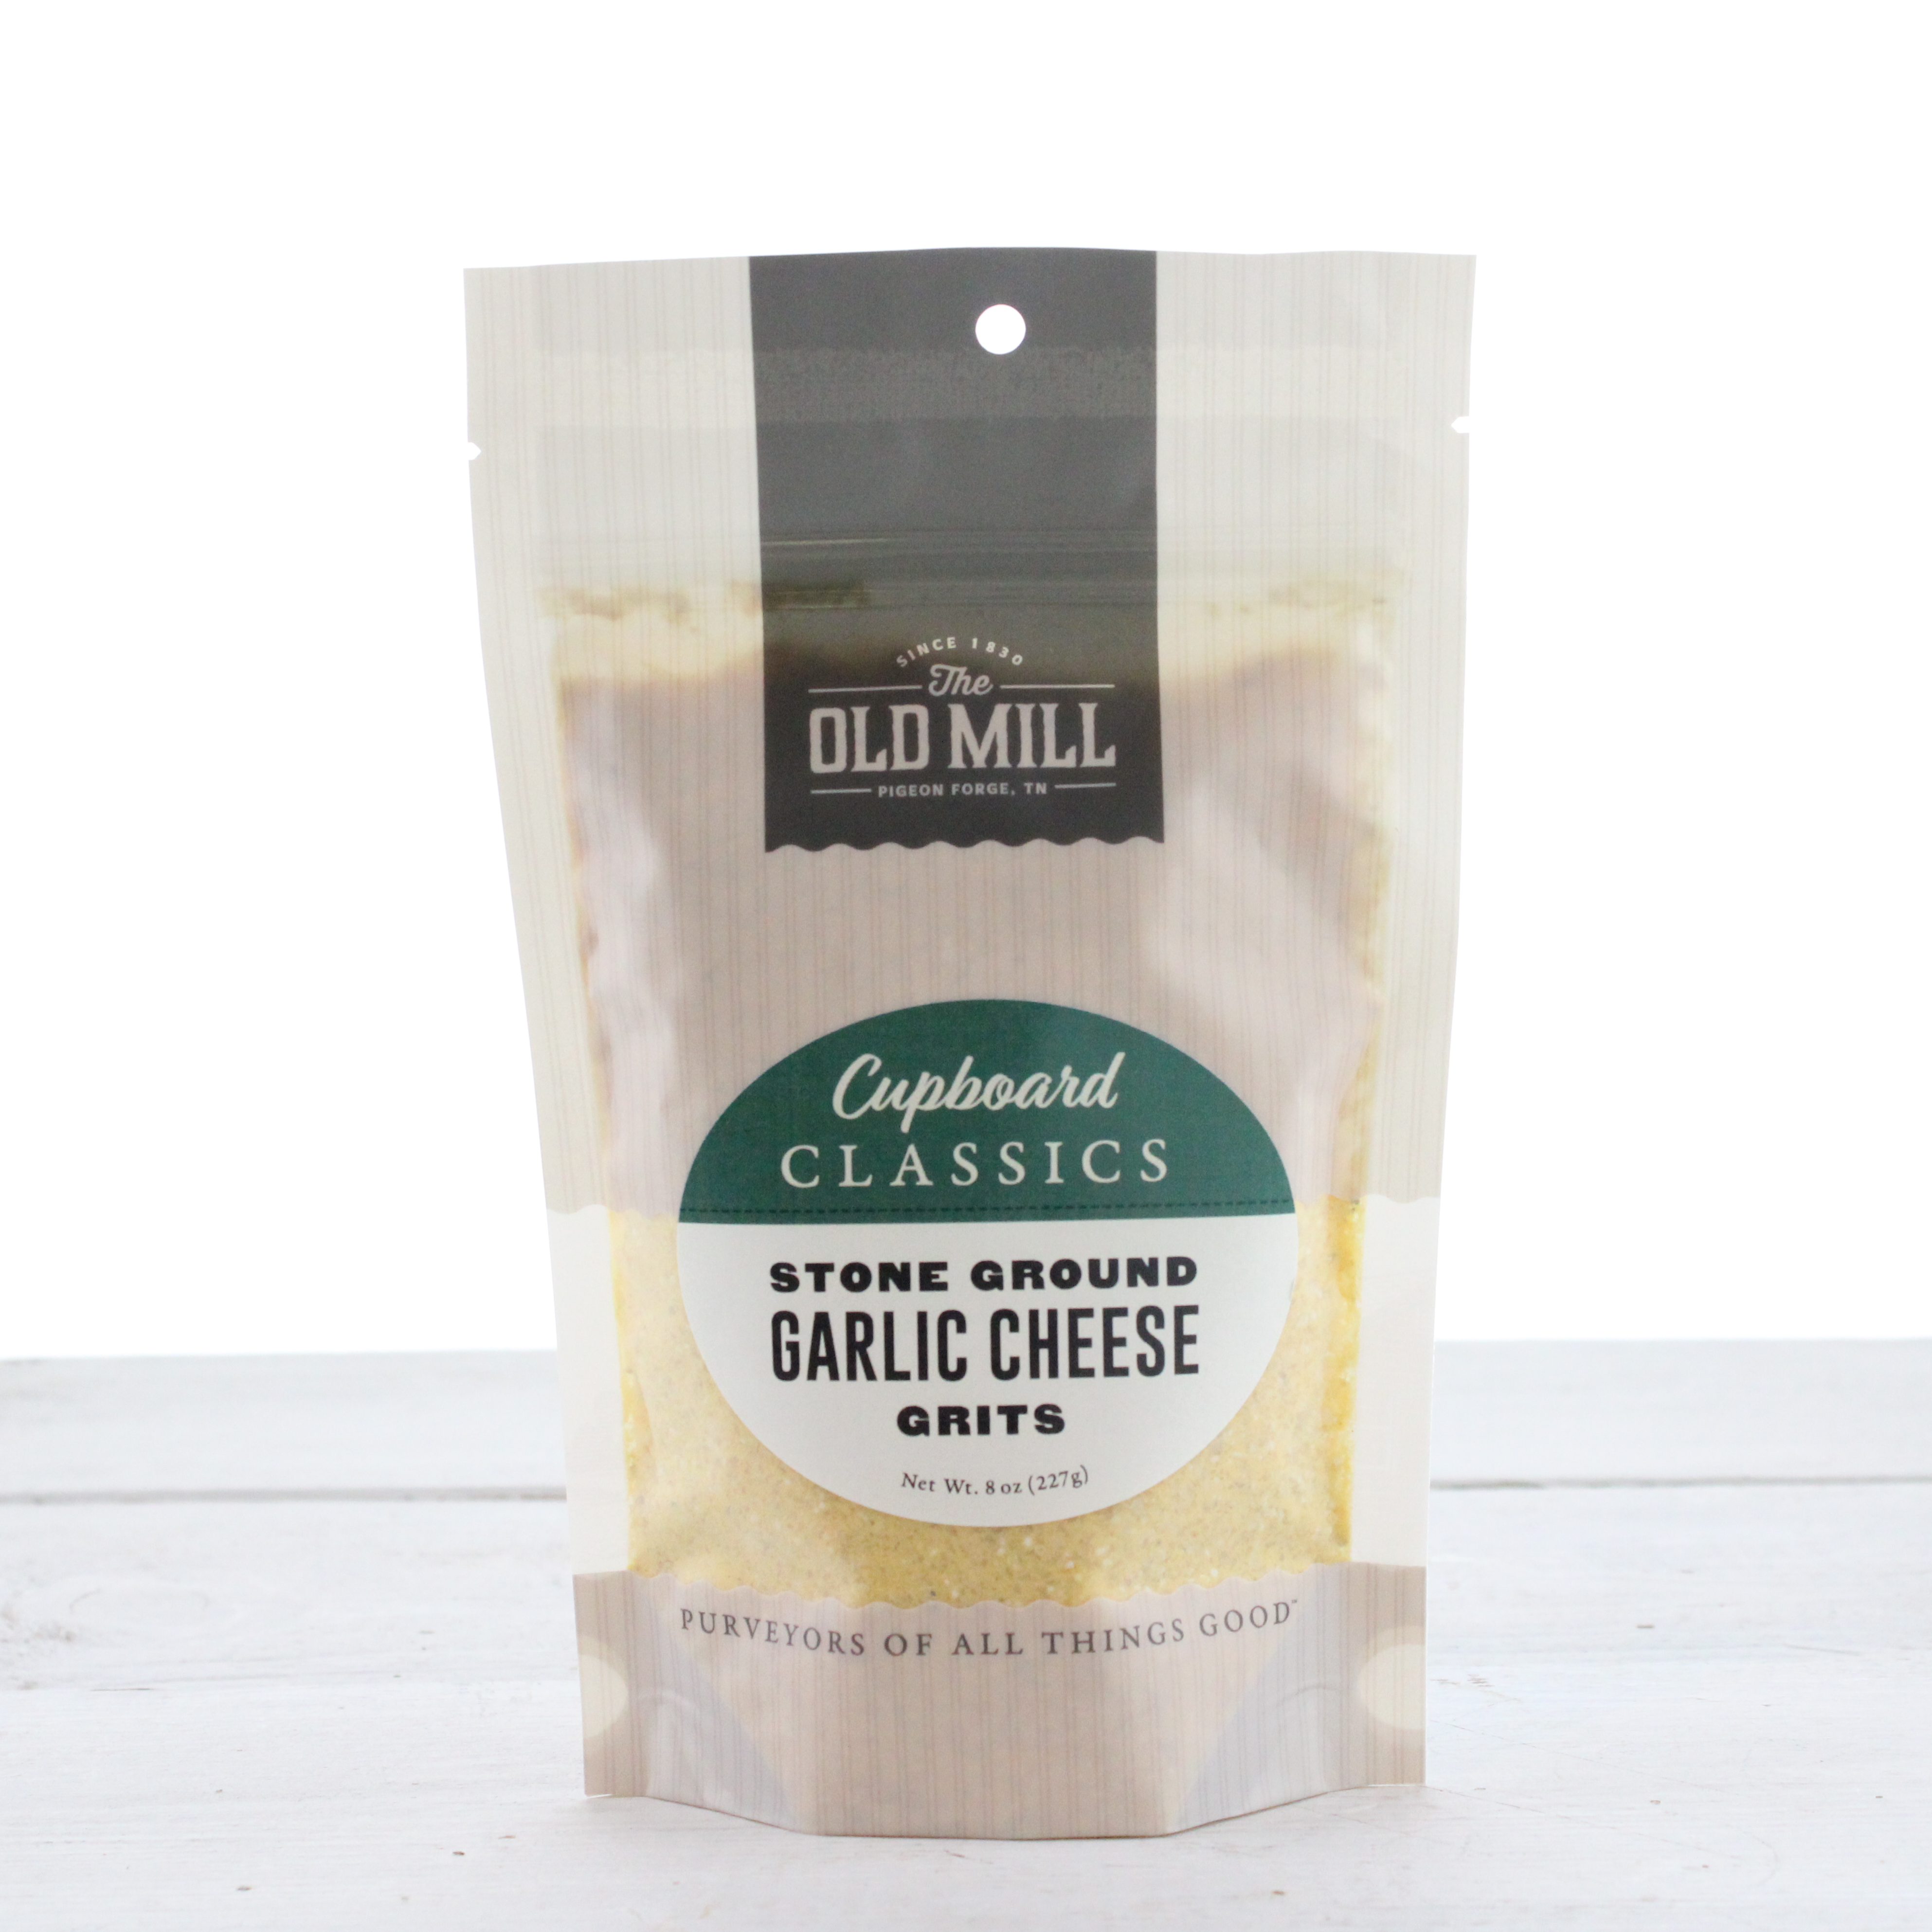 Garlic Cheese Grits – The Old Mill